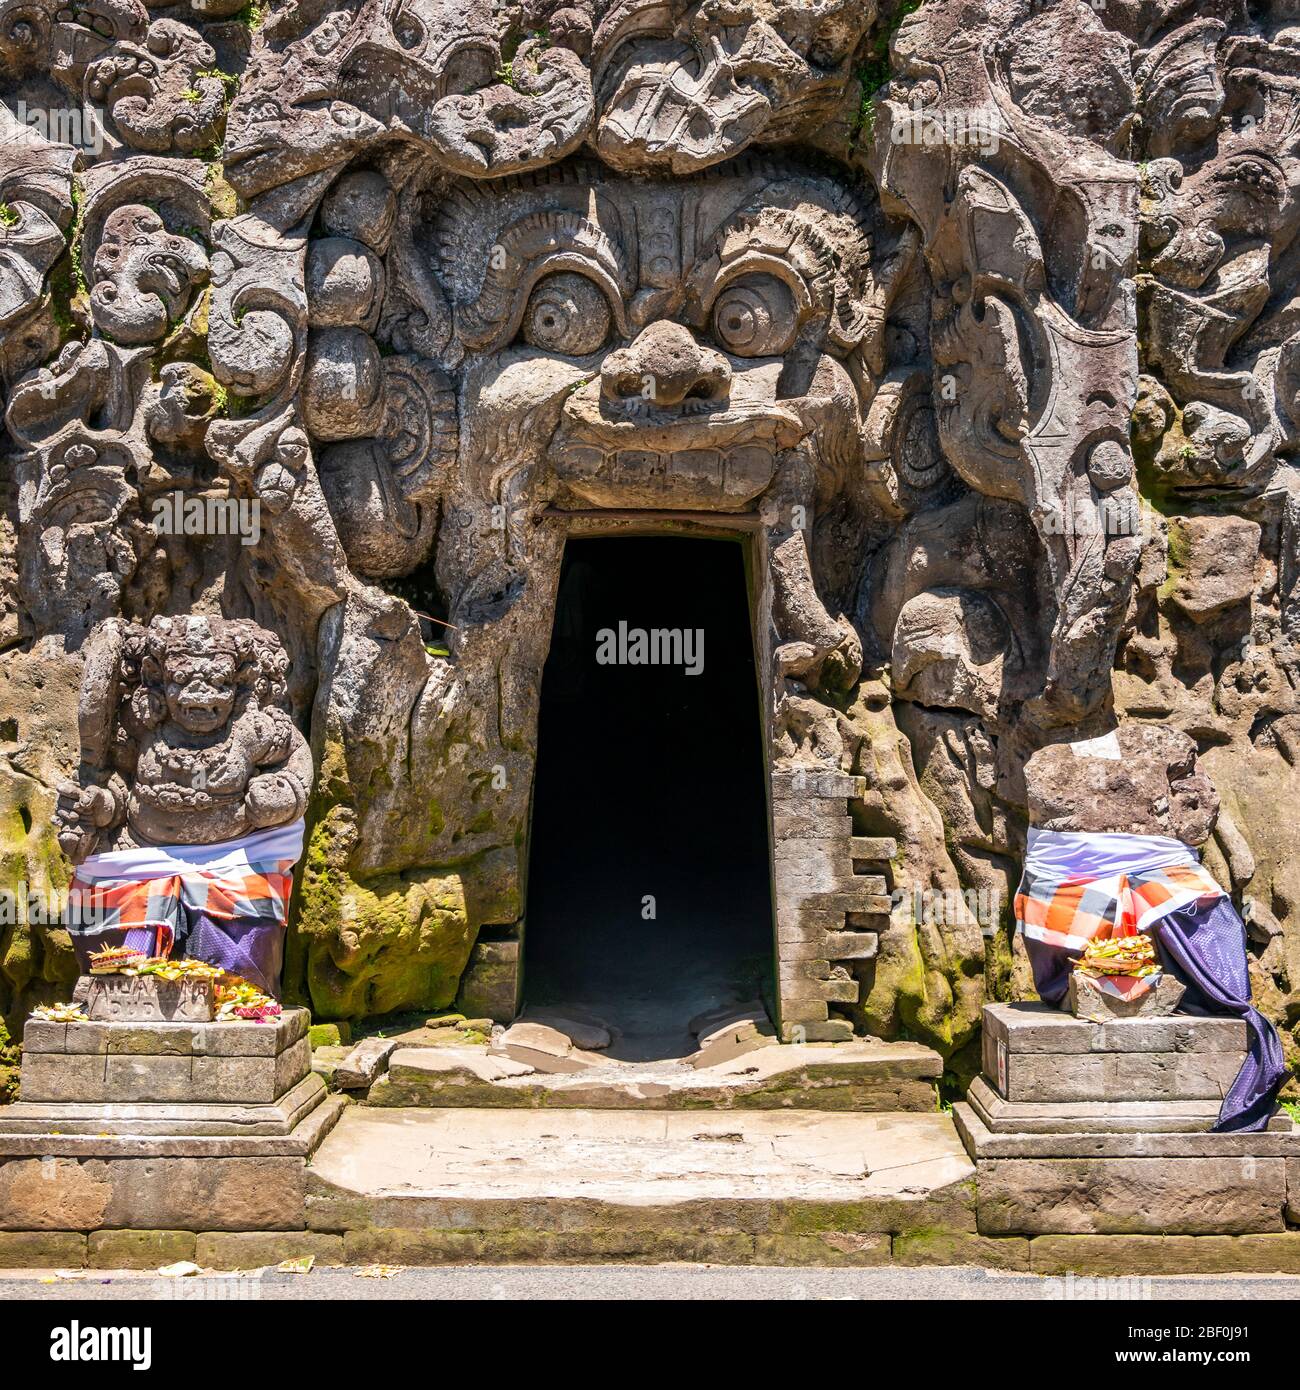 Square view of the Elephant cave in Bali, Indonesia. Stock Photo